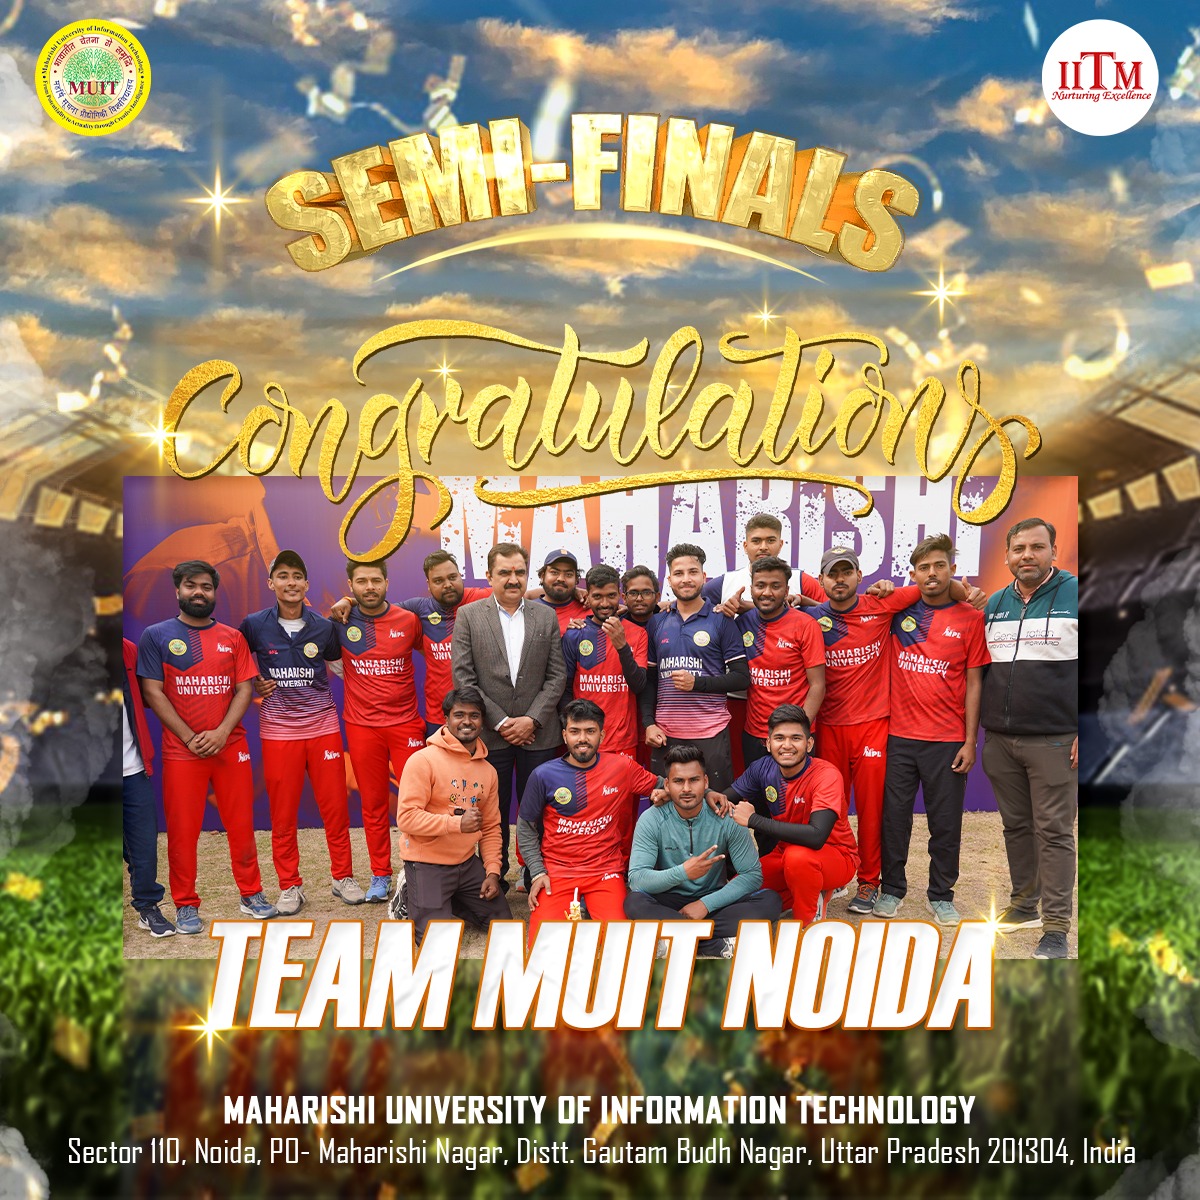 🏏 MUIT Noida emerges victorious! 🎉 Our cricket team triumphs over IINTM in the semi-finals of Maharishi Premier League Season 3, securing their spot in the finals! Let's cheer them on as they aim for glory! 🏆 

#MPLSeason3 #MUITNoida #CricketVictory  #MaharishiPremierLeague…